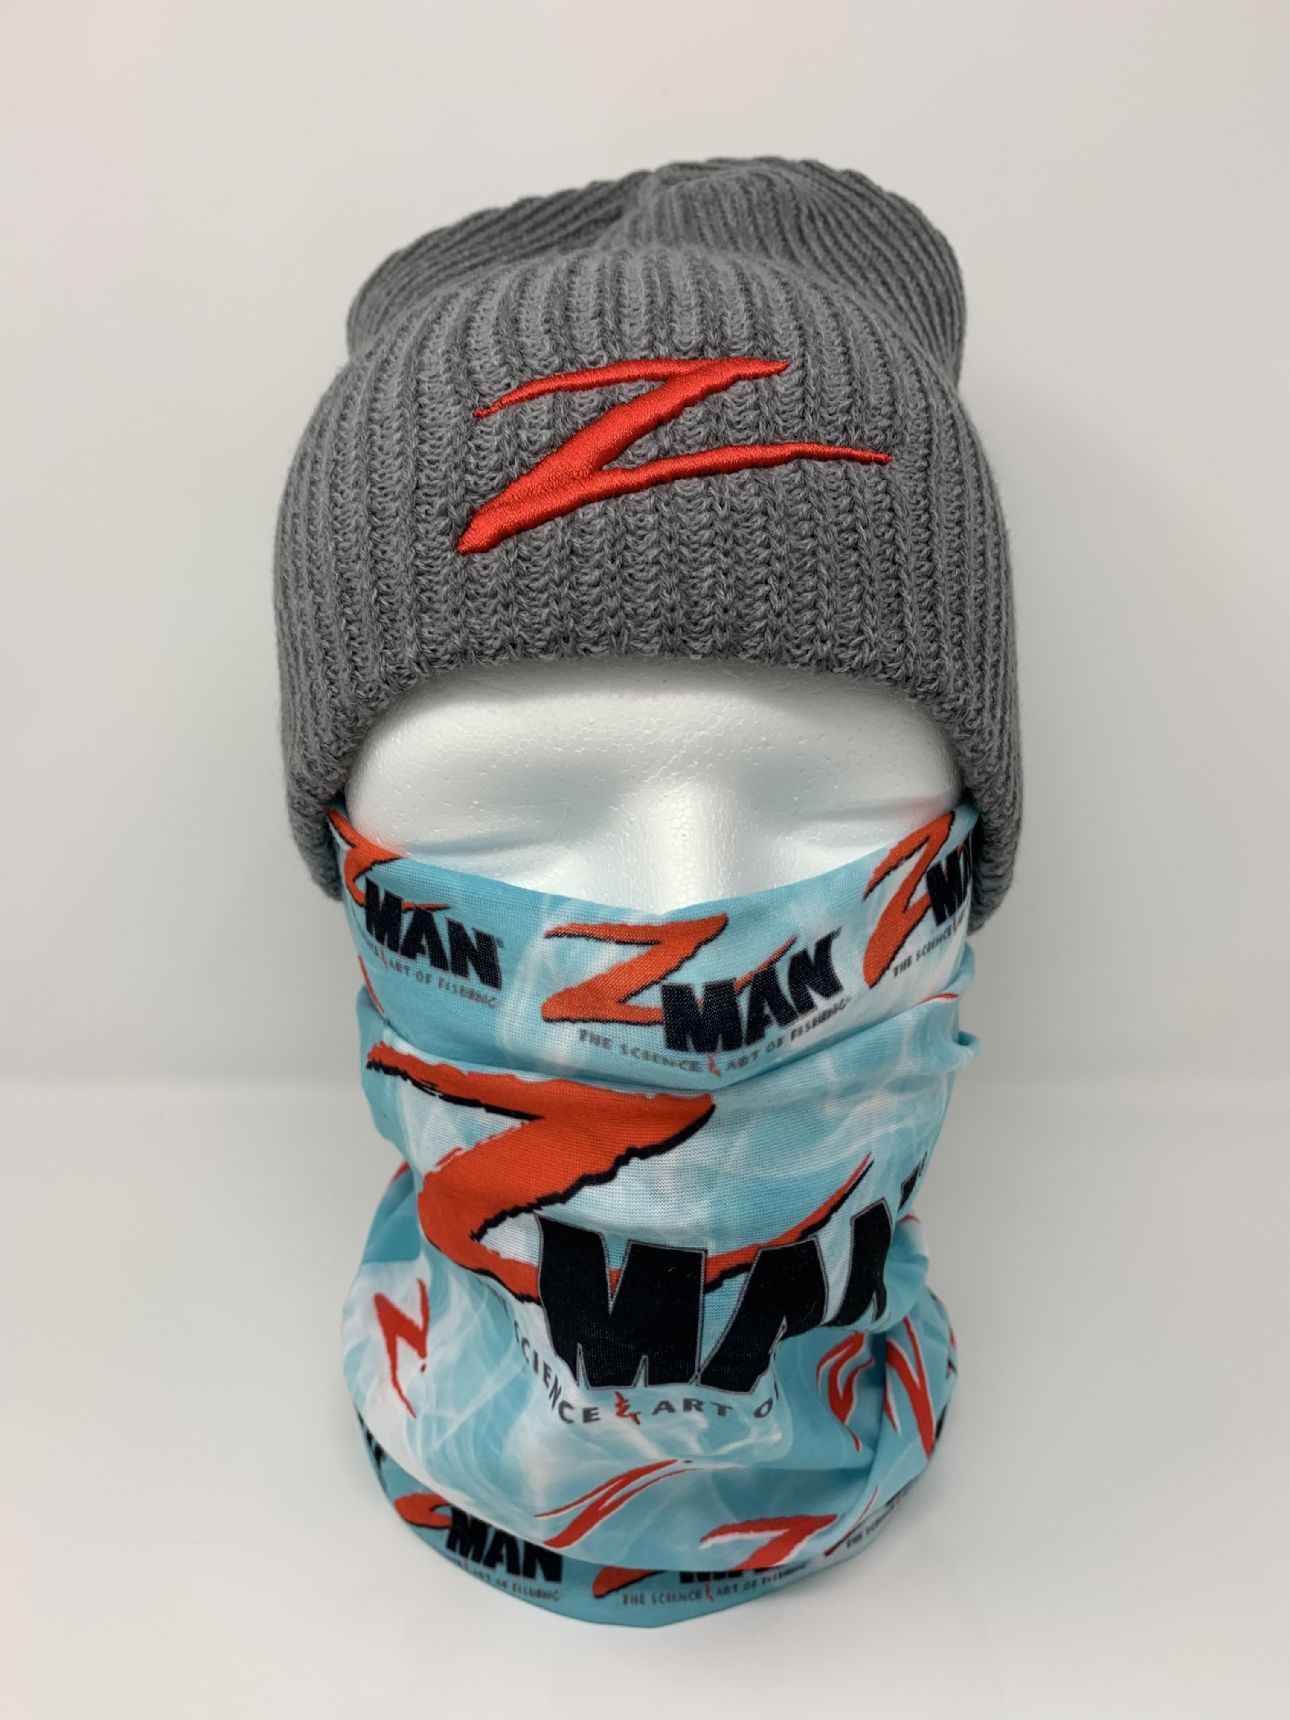 Z-MAN Snood Face & Neck Gaiter from